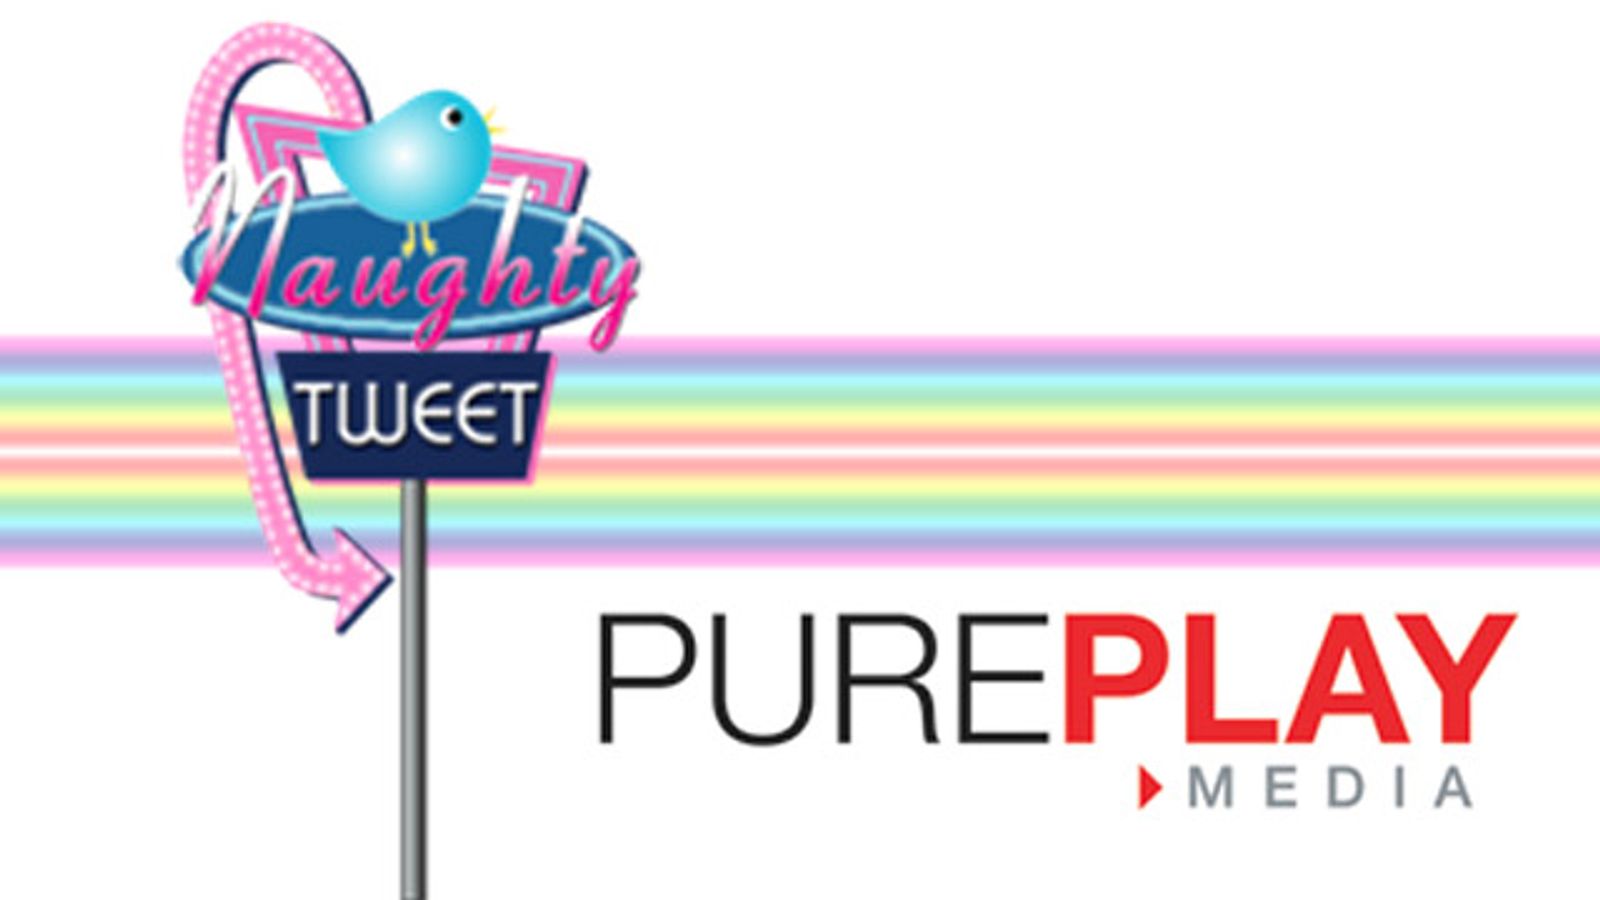 Naughty Tweet to Promote Pure Play on Social Networks